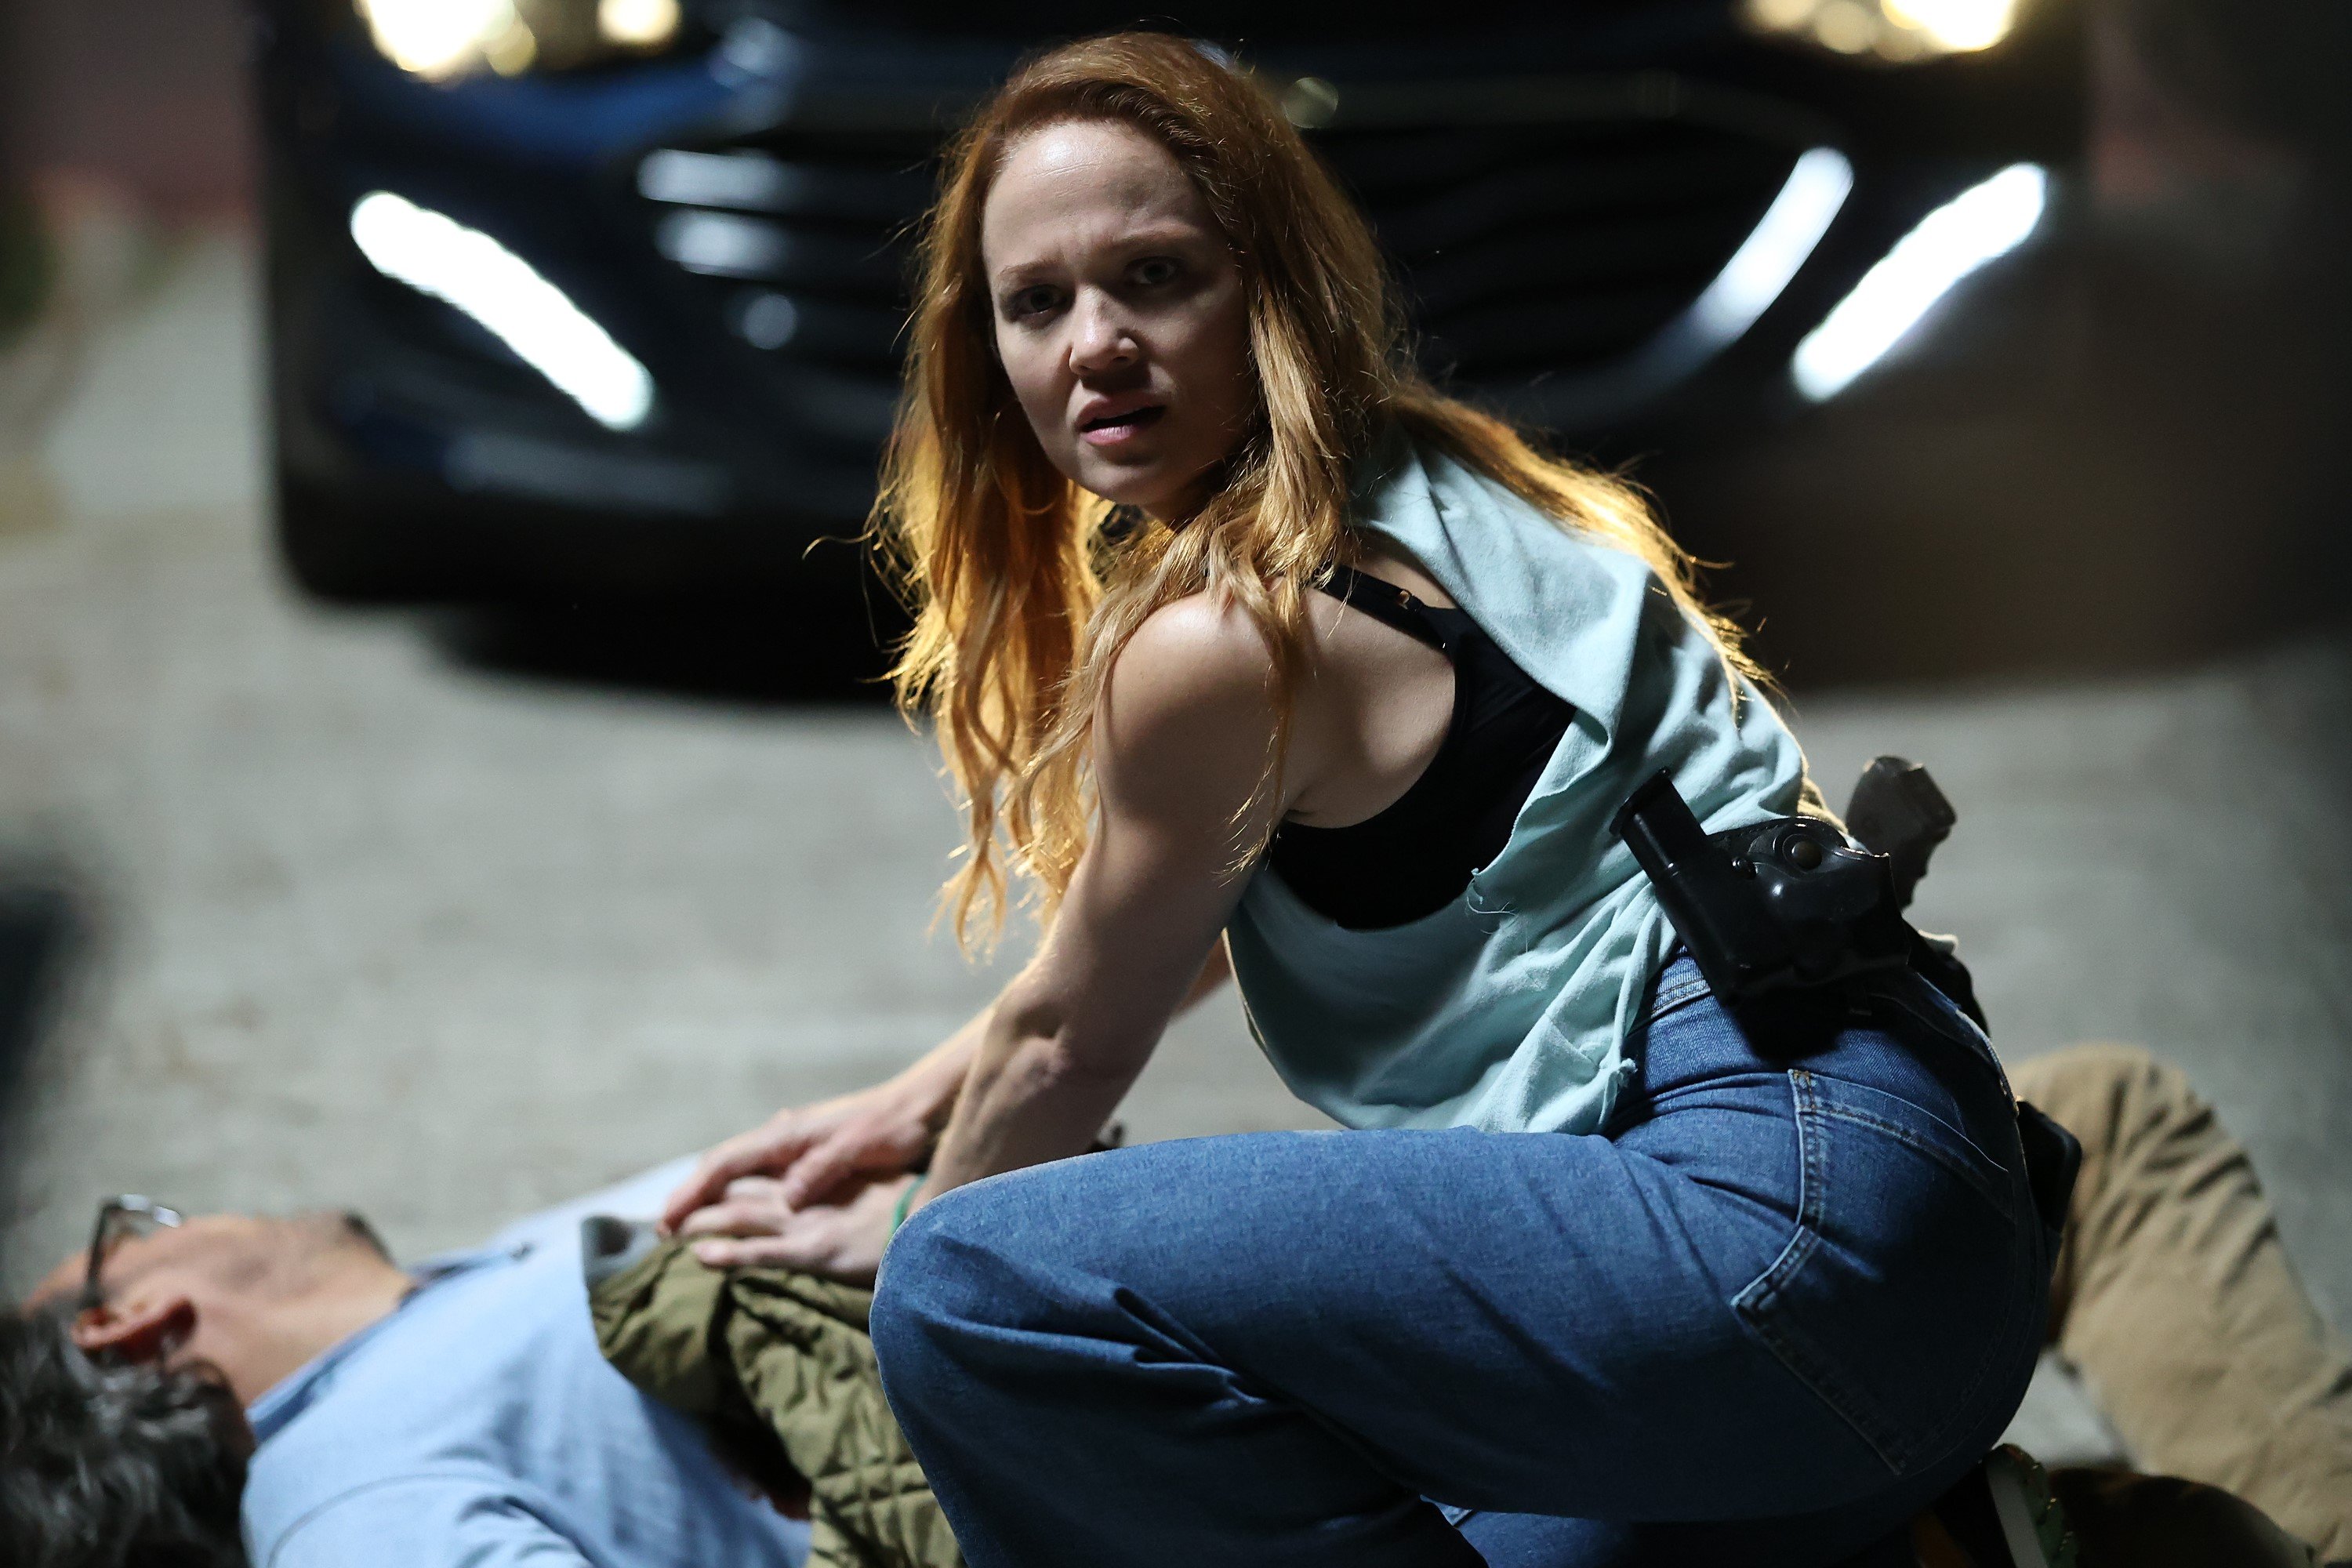 Erika Christensen, in character as Angie Polaski in 'Will Trent' Season 1 Episode 2, wears a light gray tank top and jeans as she tends to a gunshot victim.